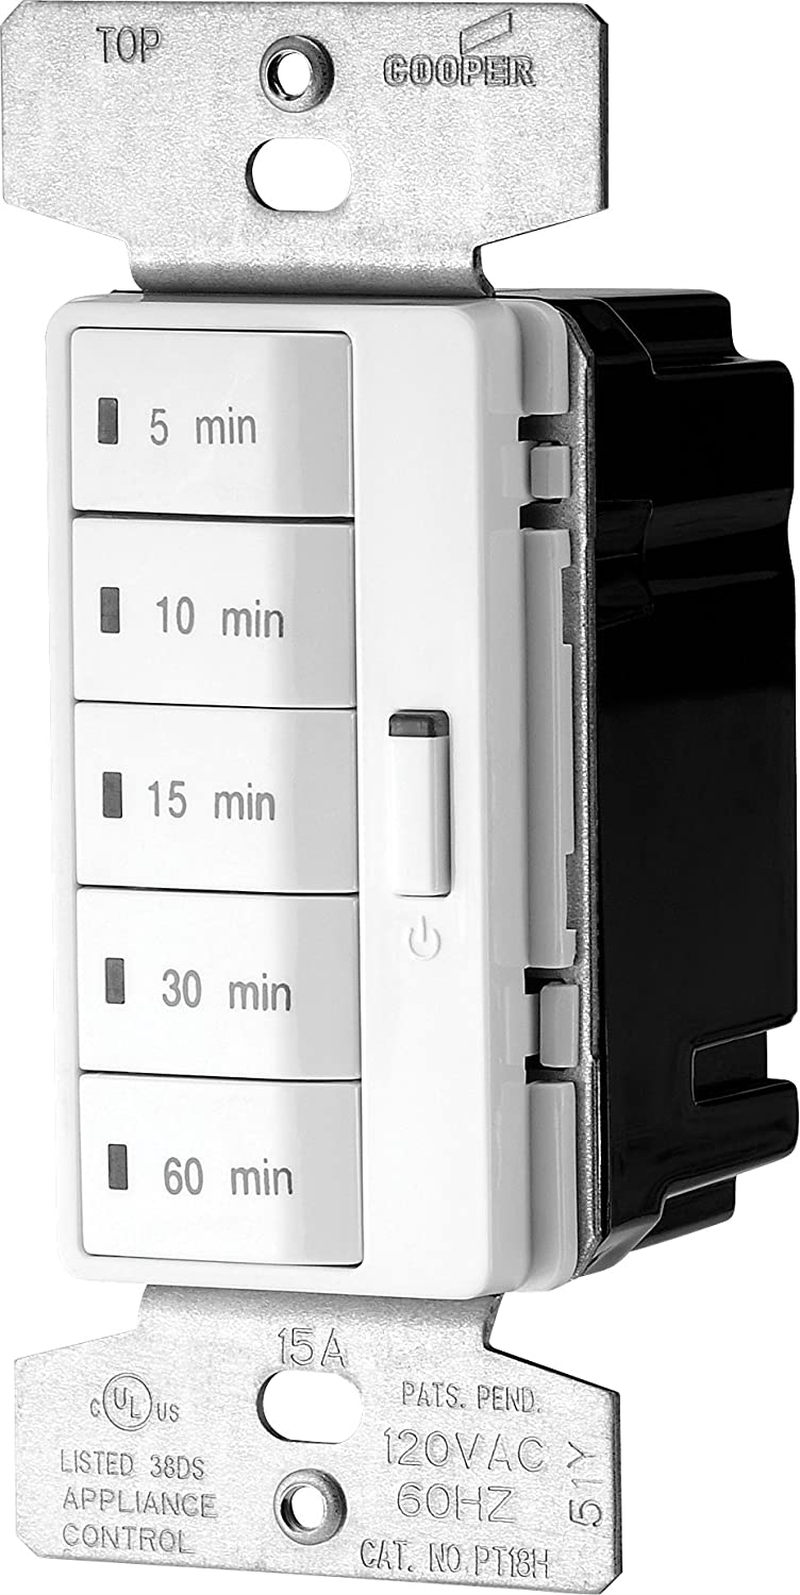 EATON PT18M-W-K Accell Core Programmable Timer, 120 V, 5, 10, 15, 30, 60 Min Off, White Home & Garden > Lighting Accessories > Lighting Timers EATON   